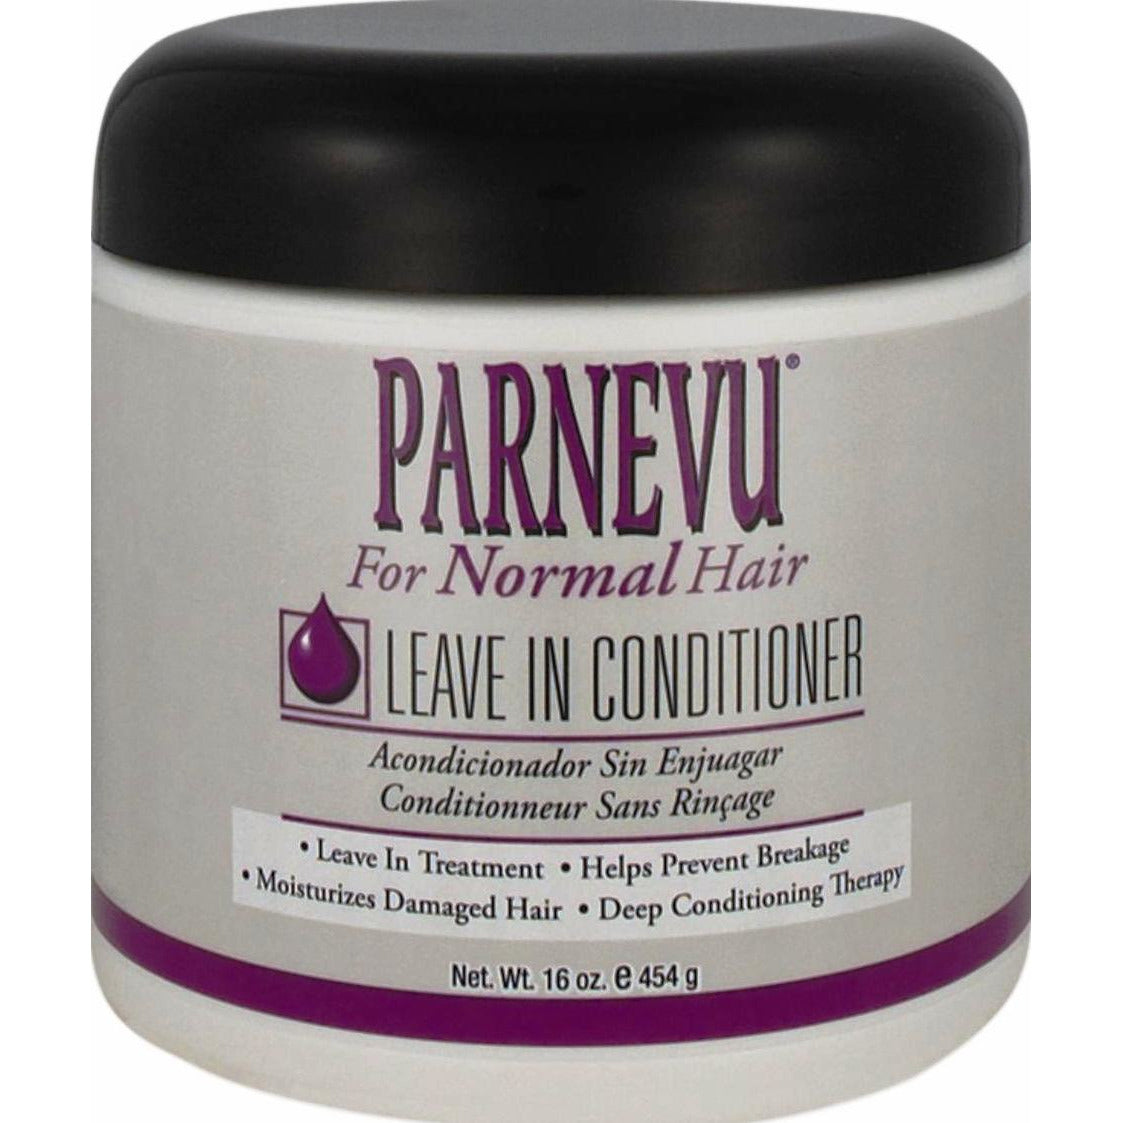 4th Ave Market: PARNEVU Leave-In Conditioner For Normal Hair